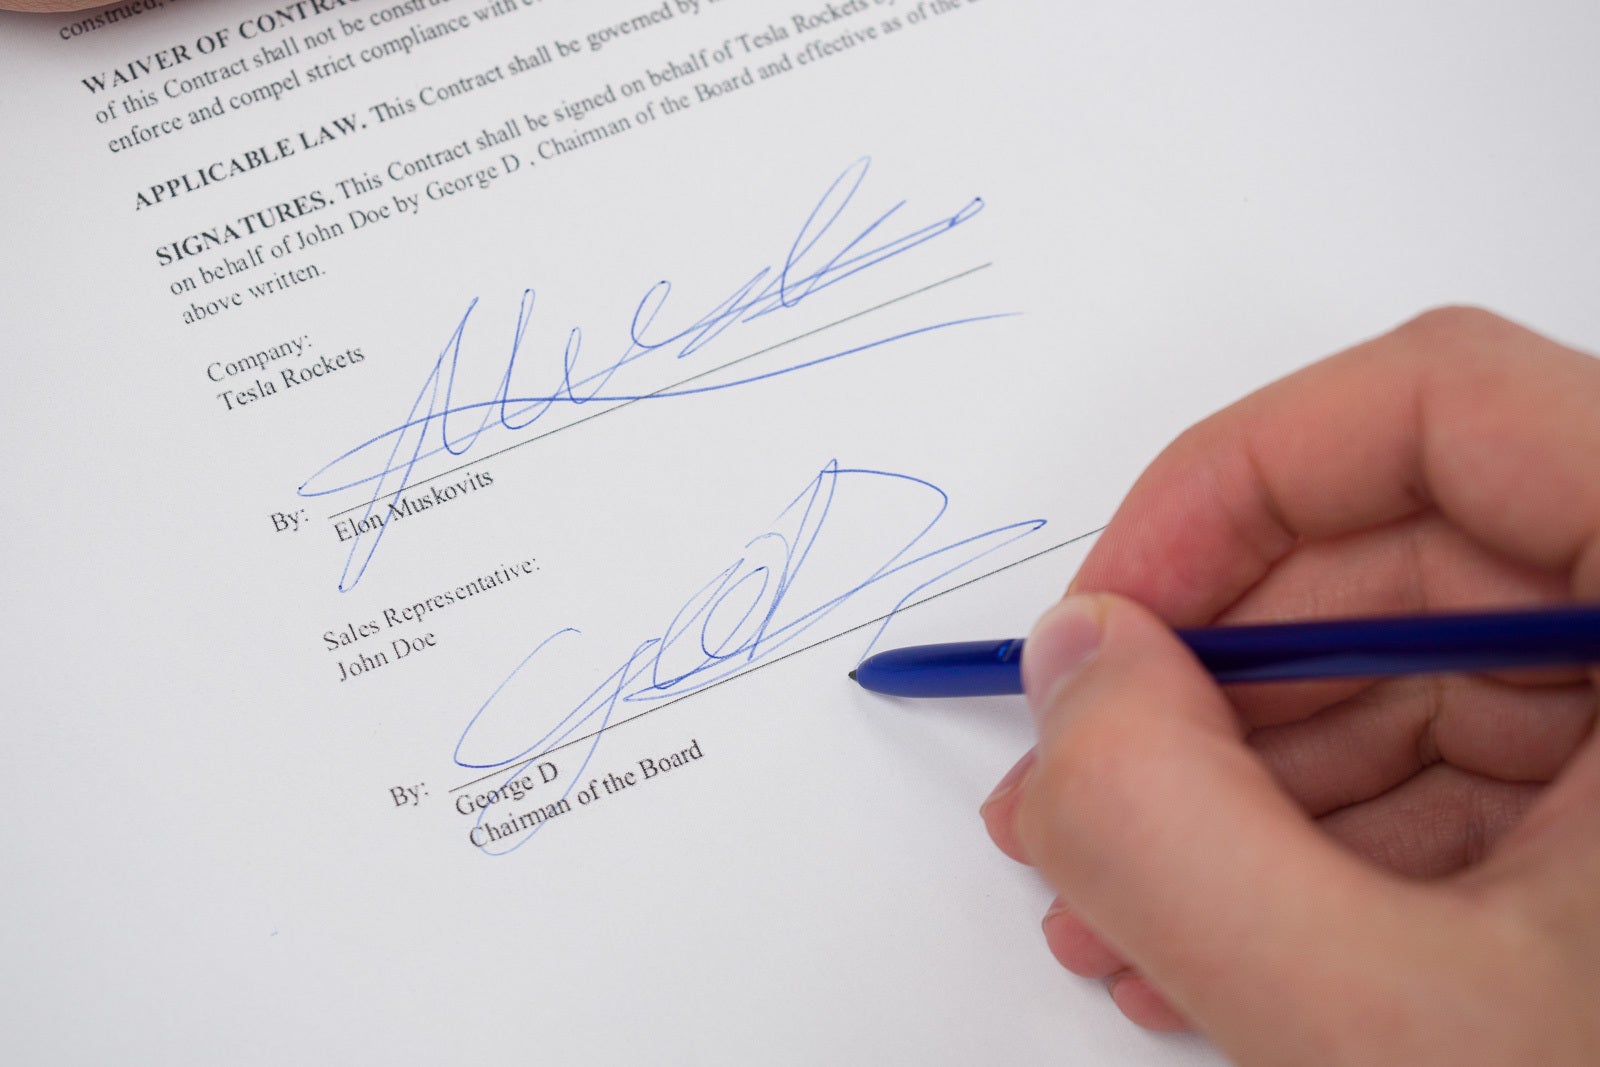 Signing contracts with your S Pen like a boss - Where can Samsung go next with the S Pen?